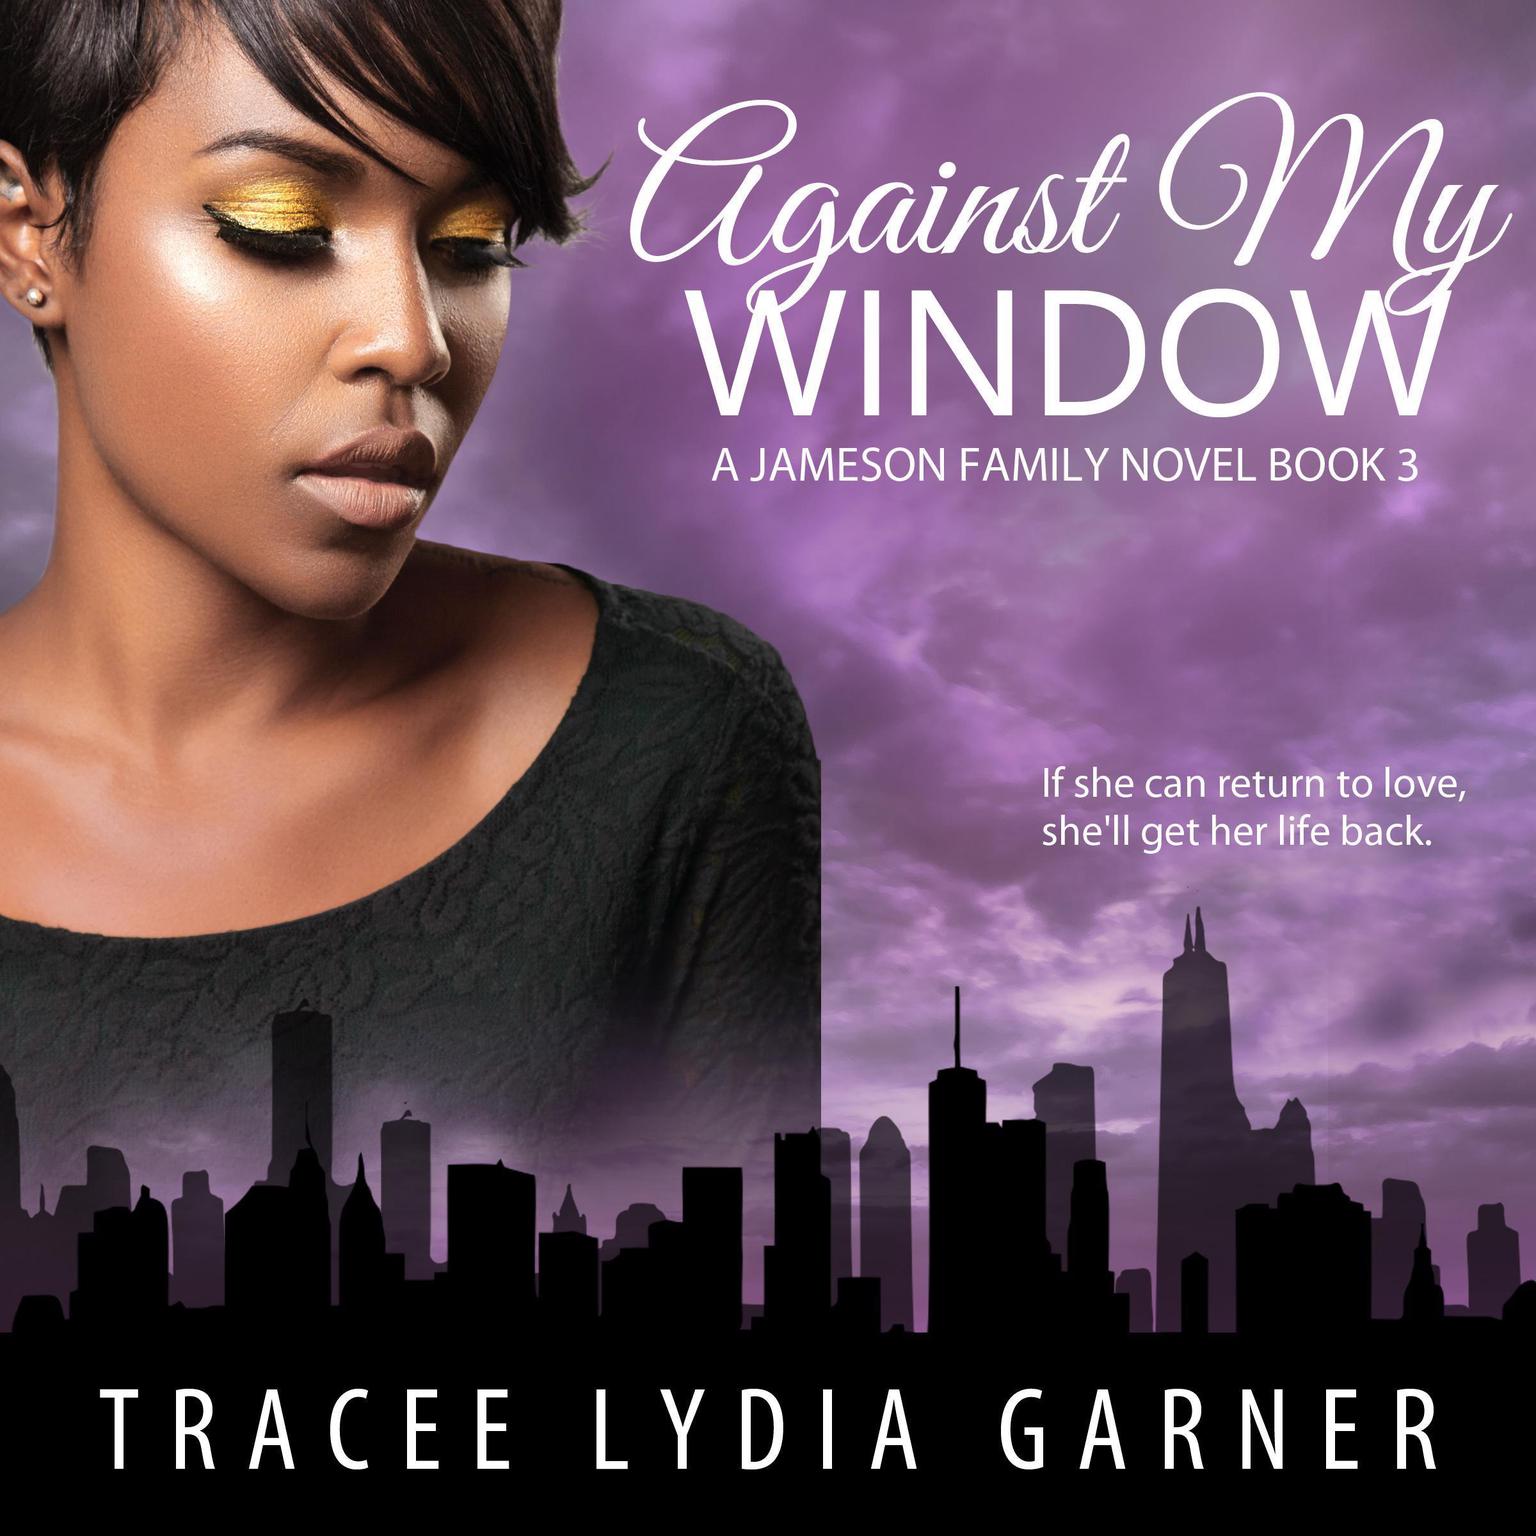 Against My Window: Book 3: Jameson Family Series Audiobook, by Tracee Lydia Garner